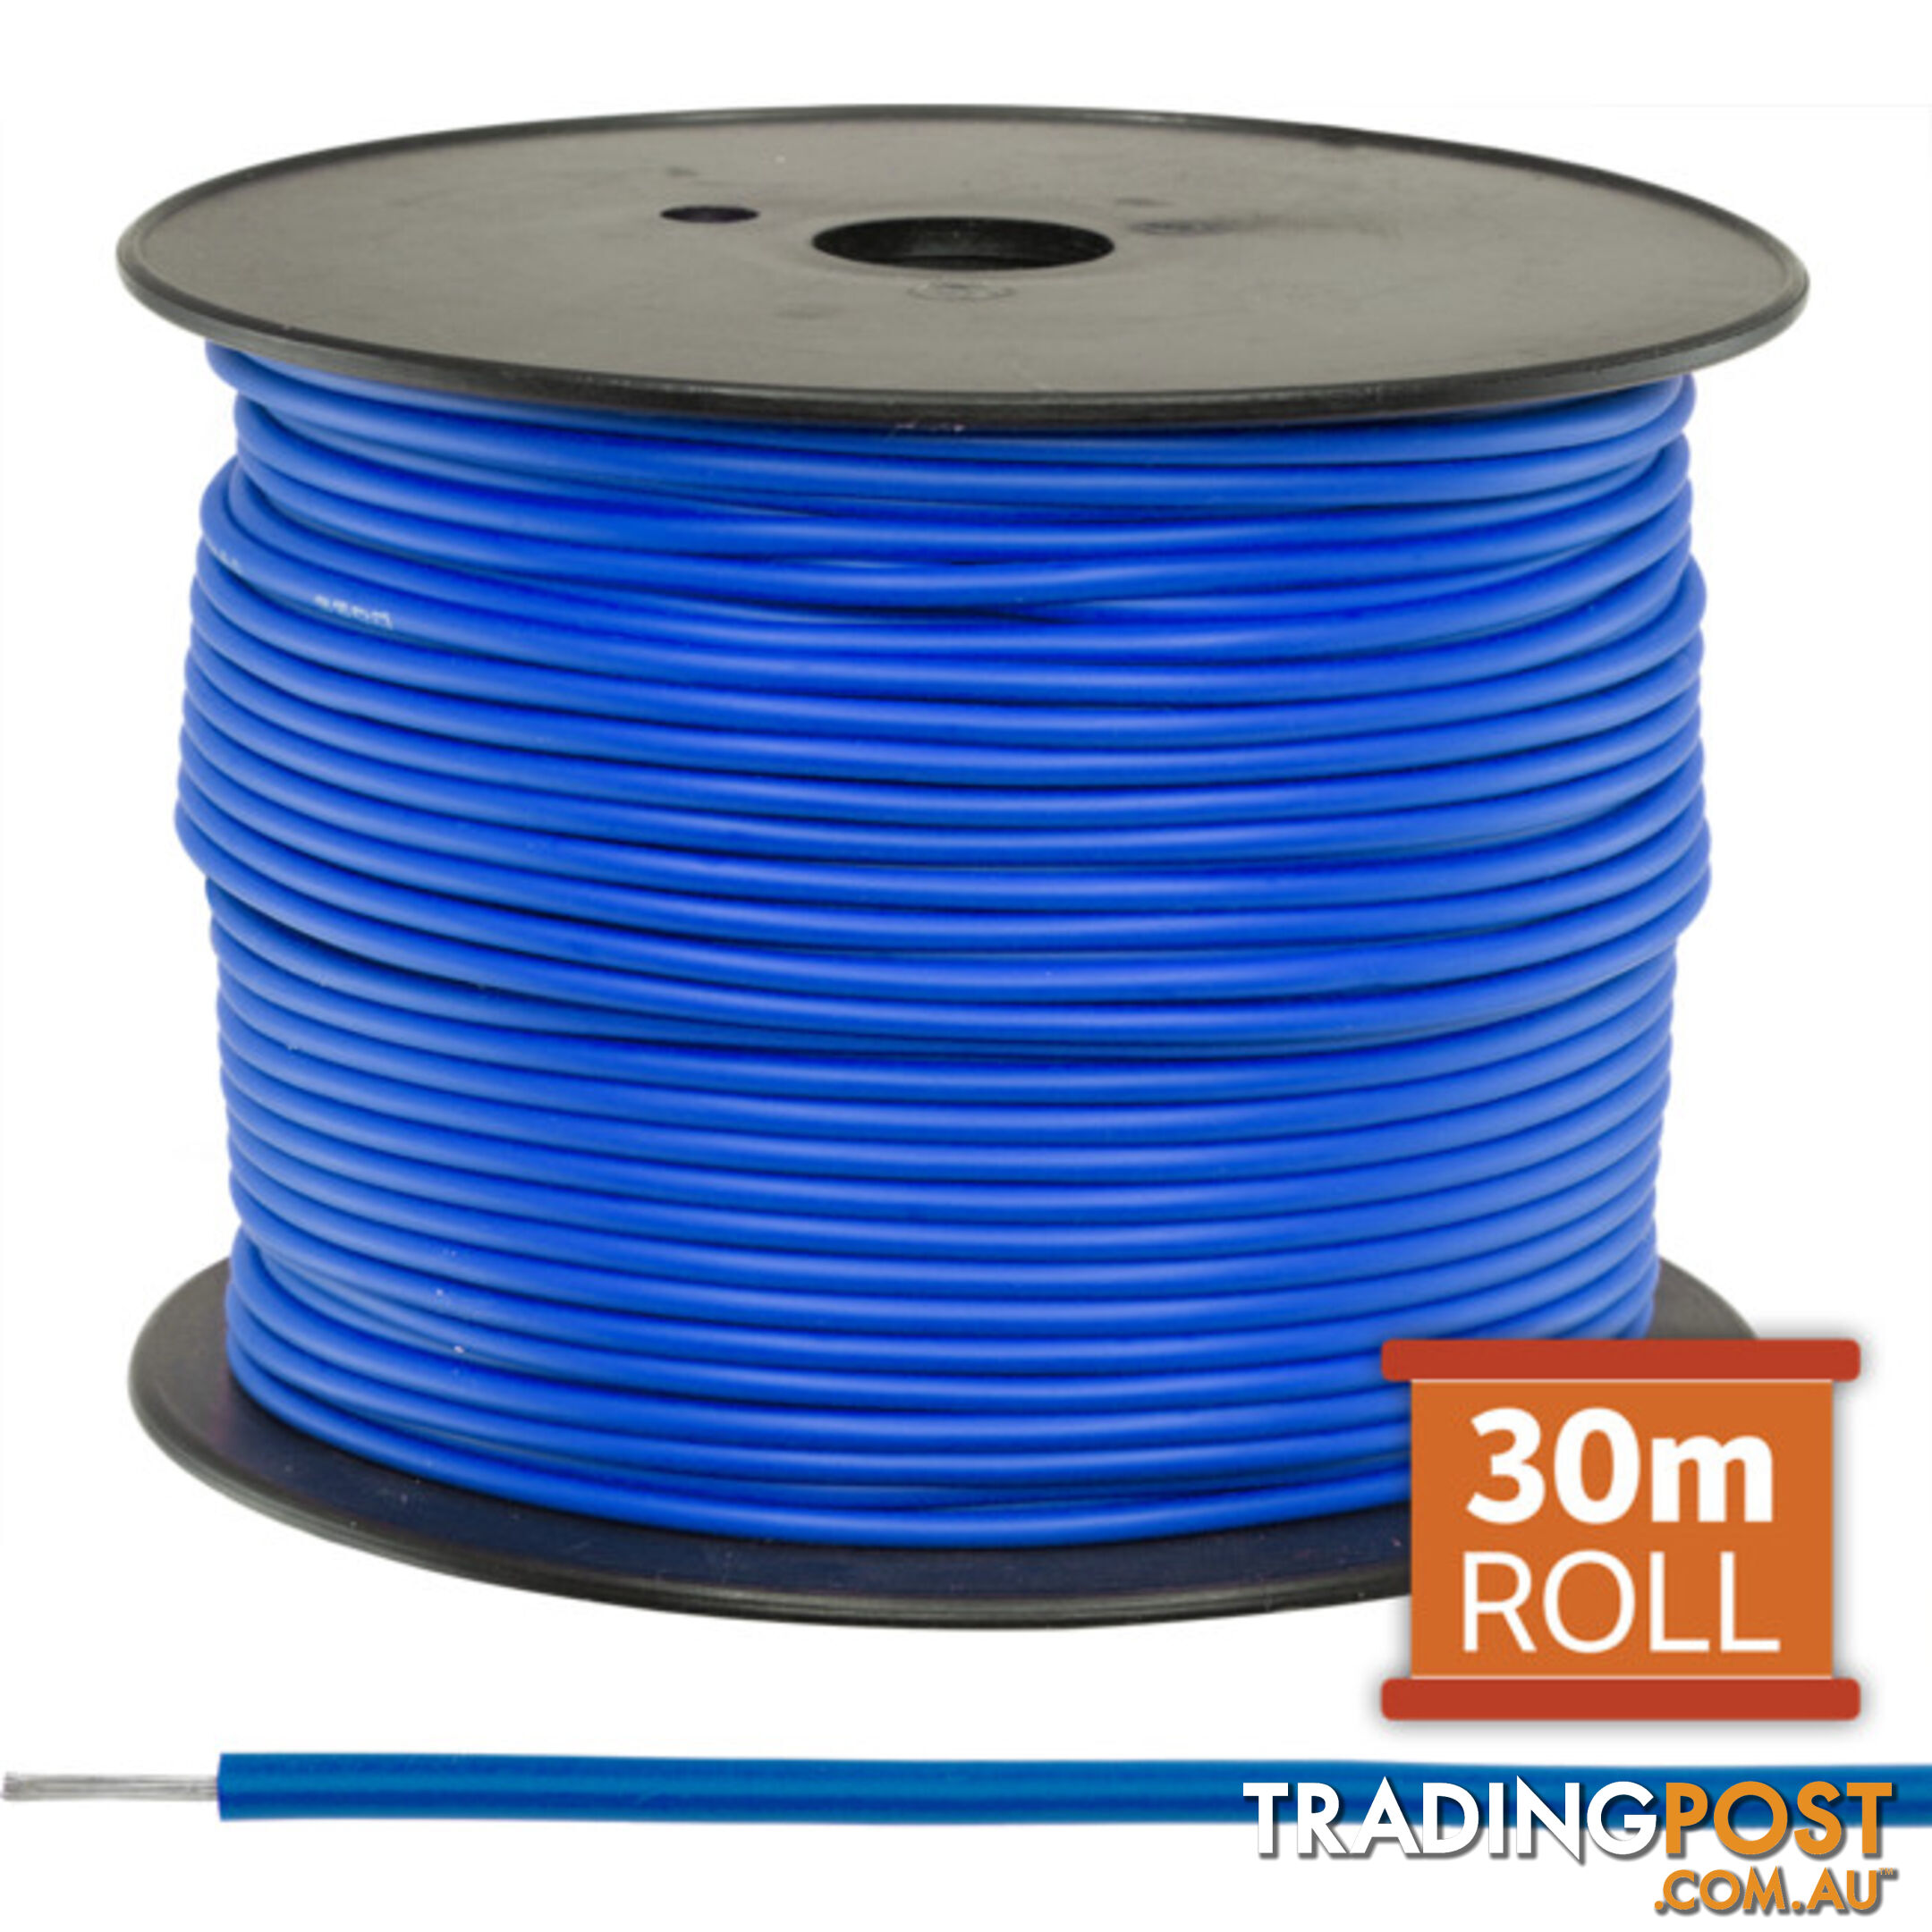 16-.2BLU-30M 30M BLUE HOOKUP WIRE/CABLE SOLD AS A REEL 30M